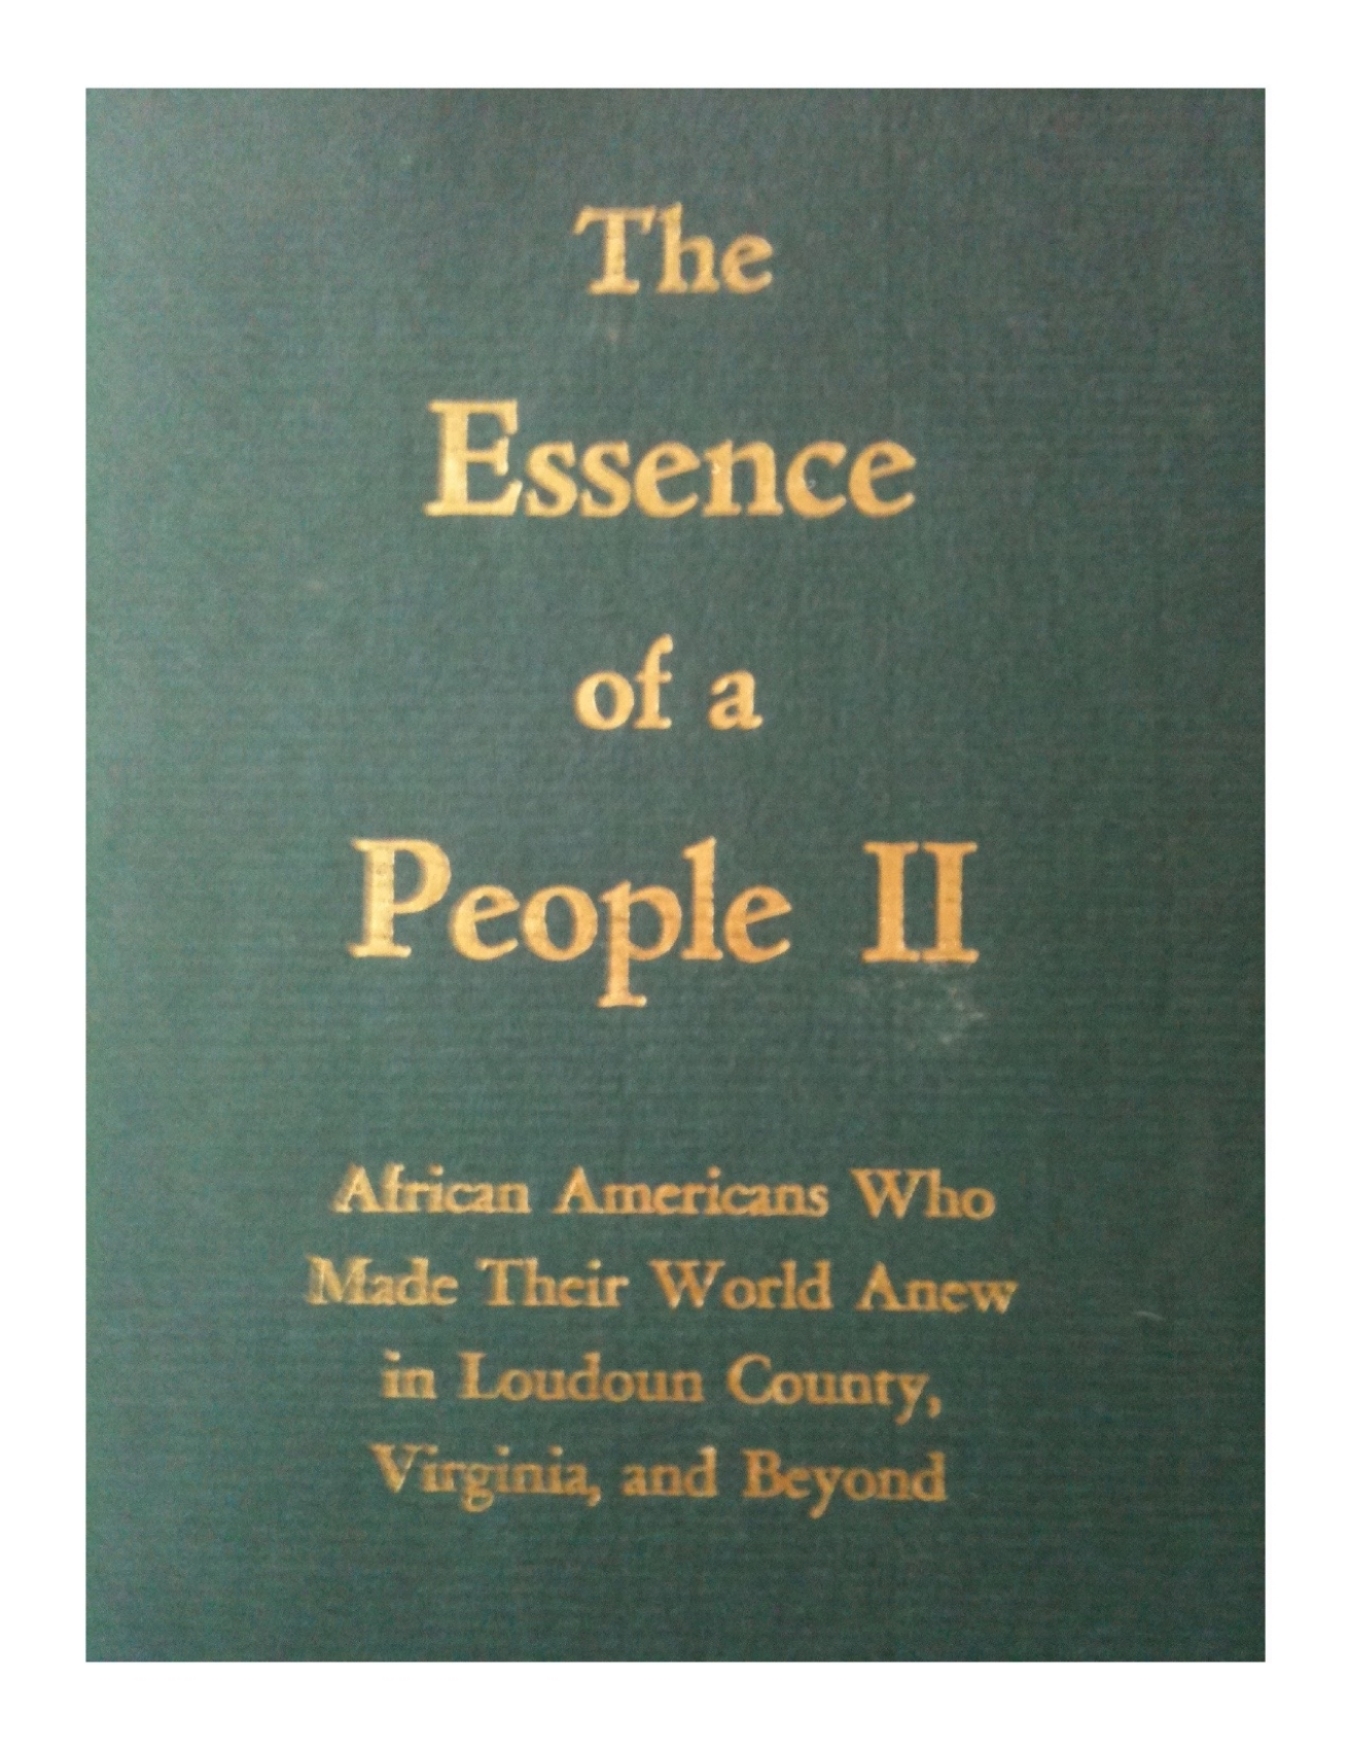 The Essence of a People II